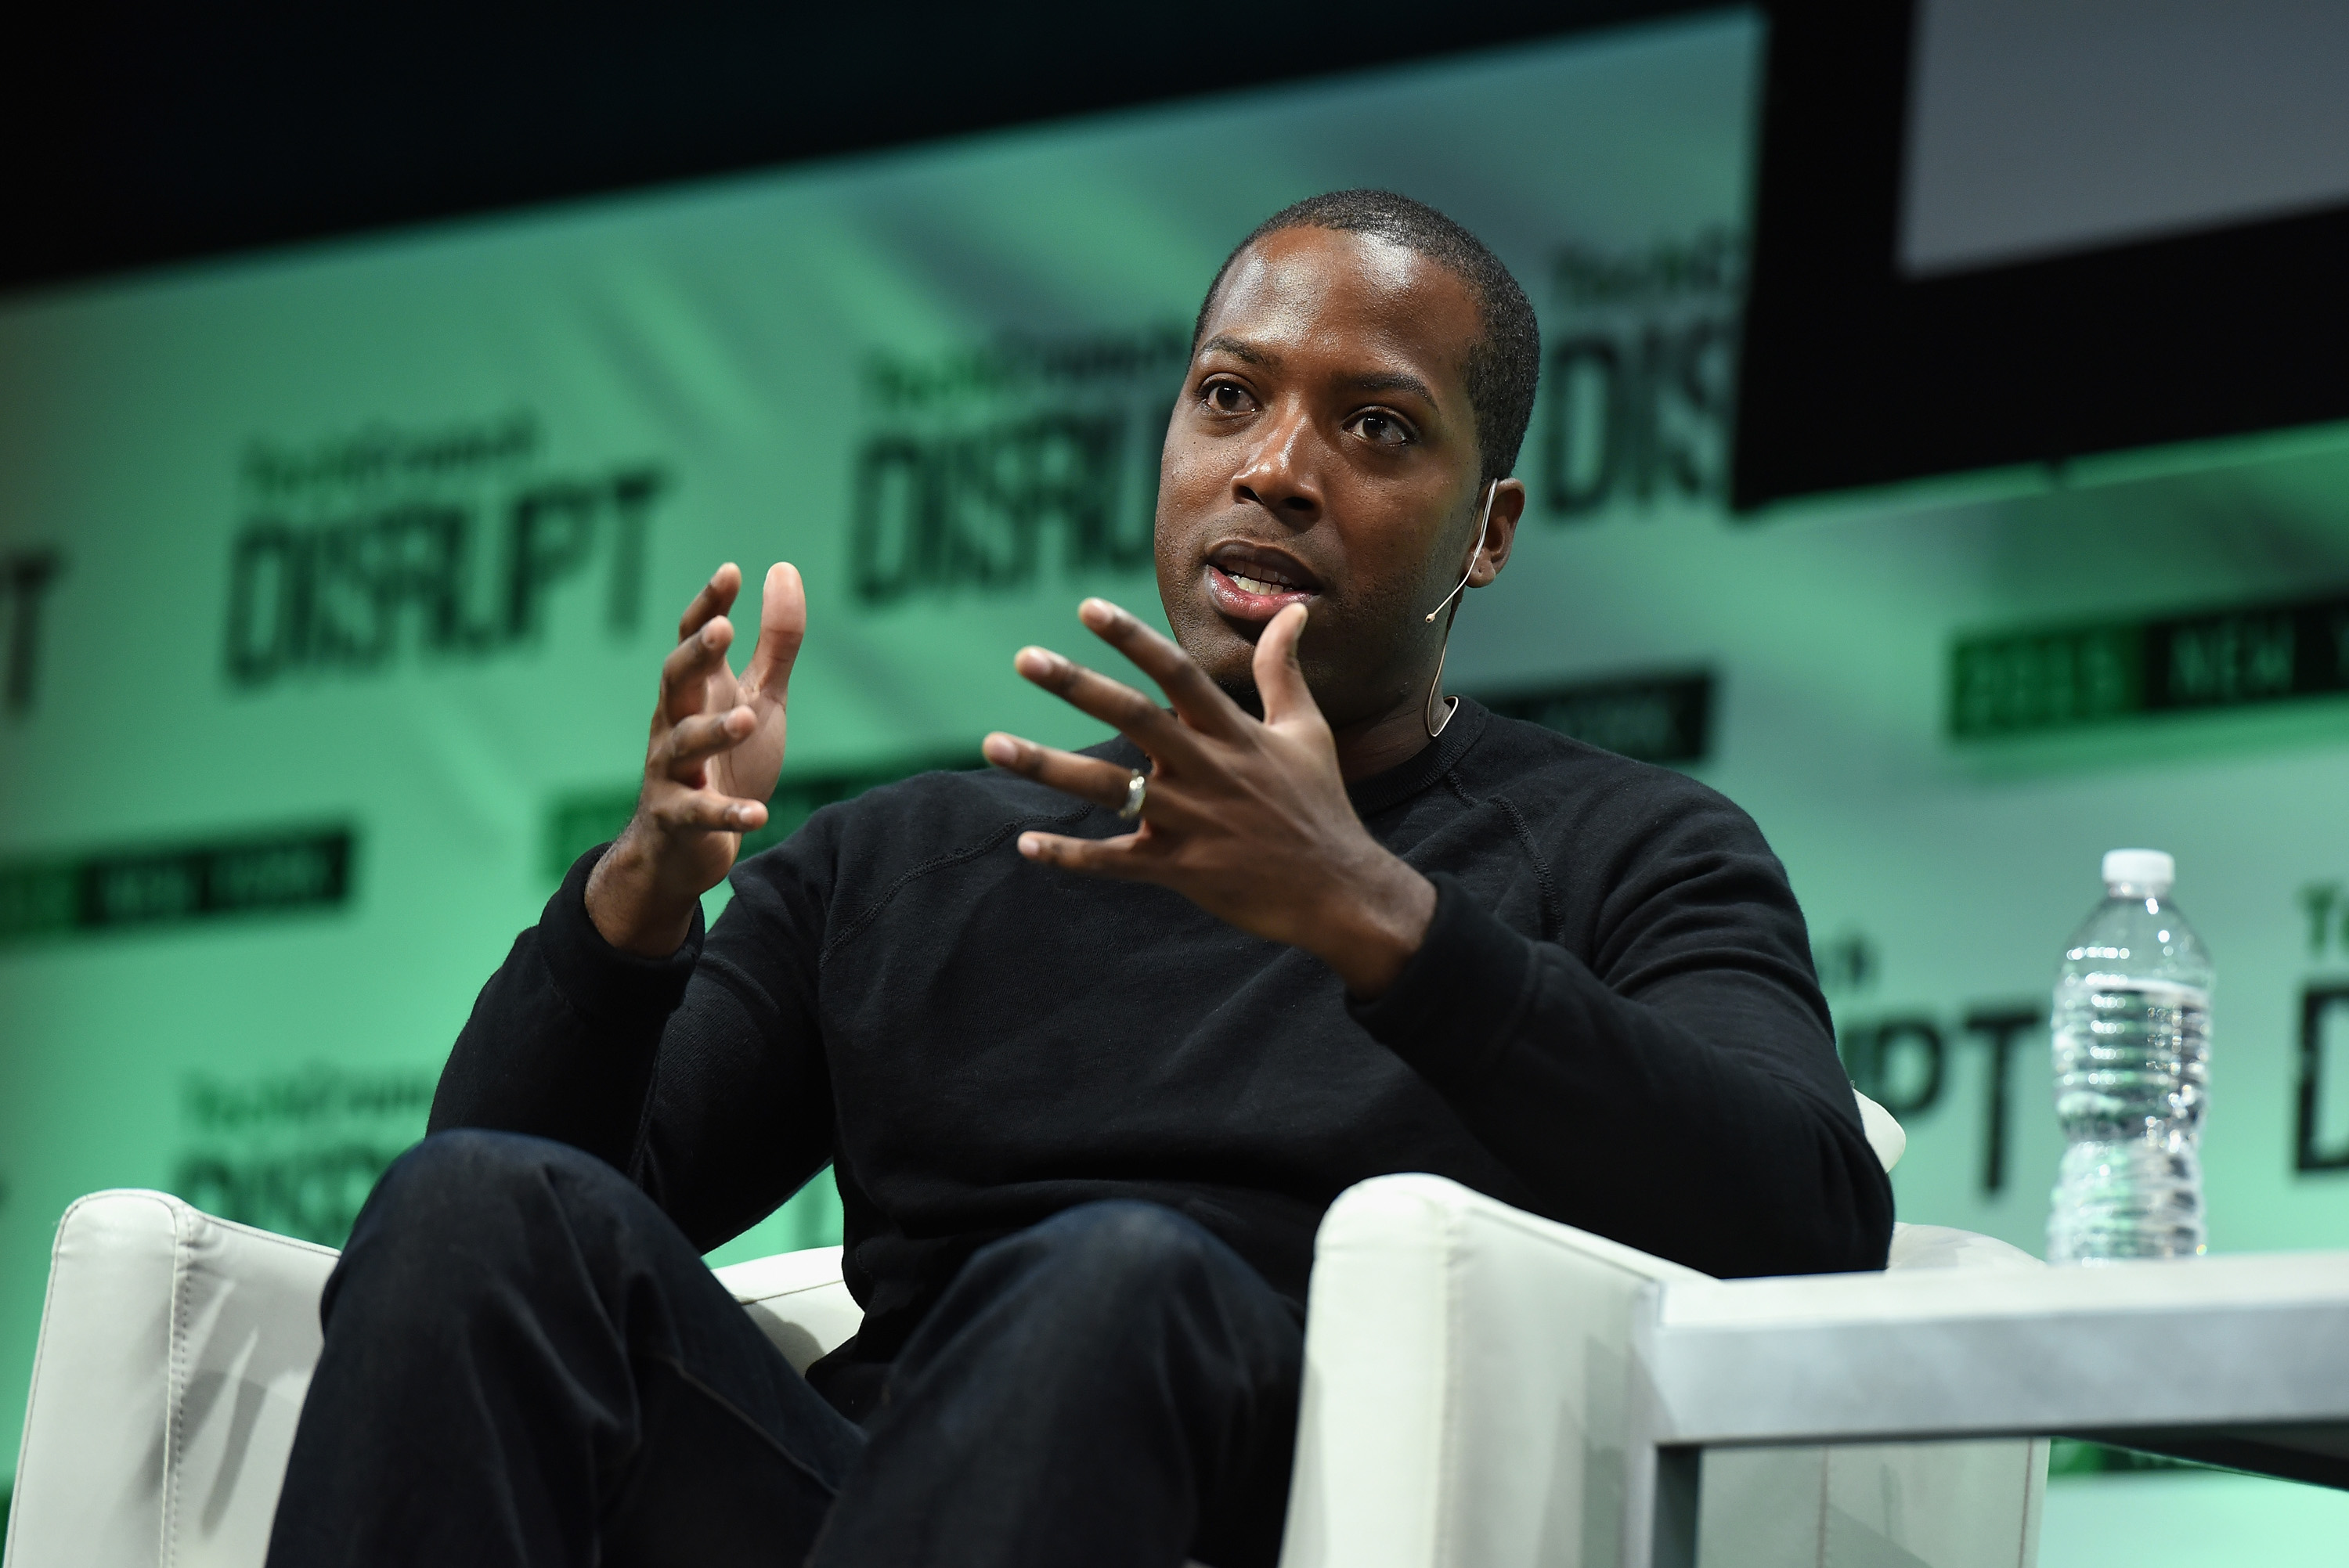 Founder and CEO of Walker &amp; Company Brands, Tristan Walker speaks onstage during TechCrunch Disrupt NY 2015 (Noam Galai&mdash;2015 Getty Images)